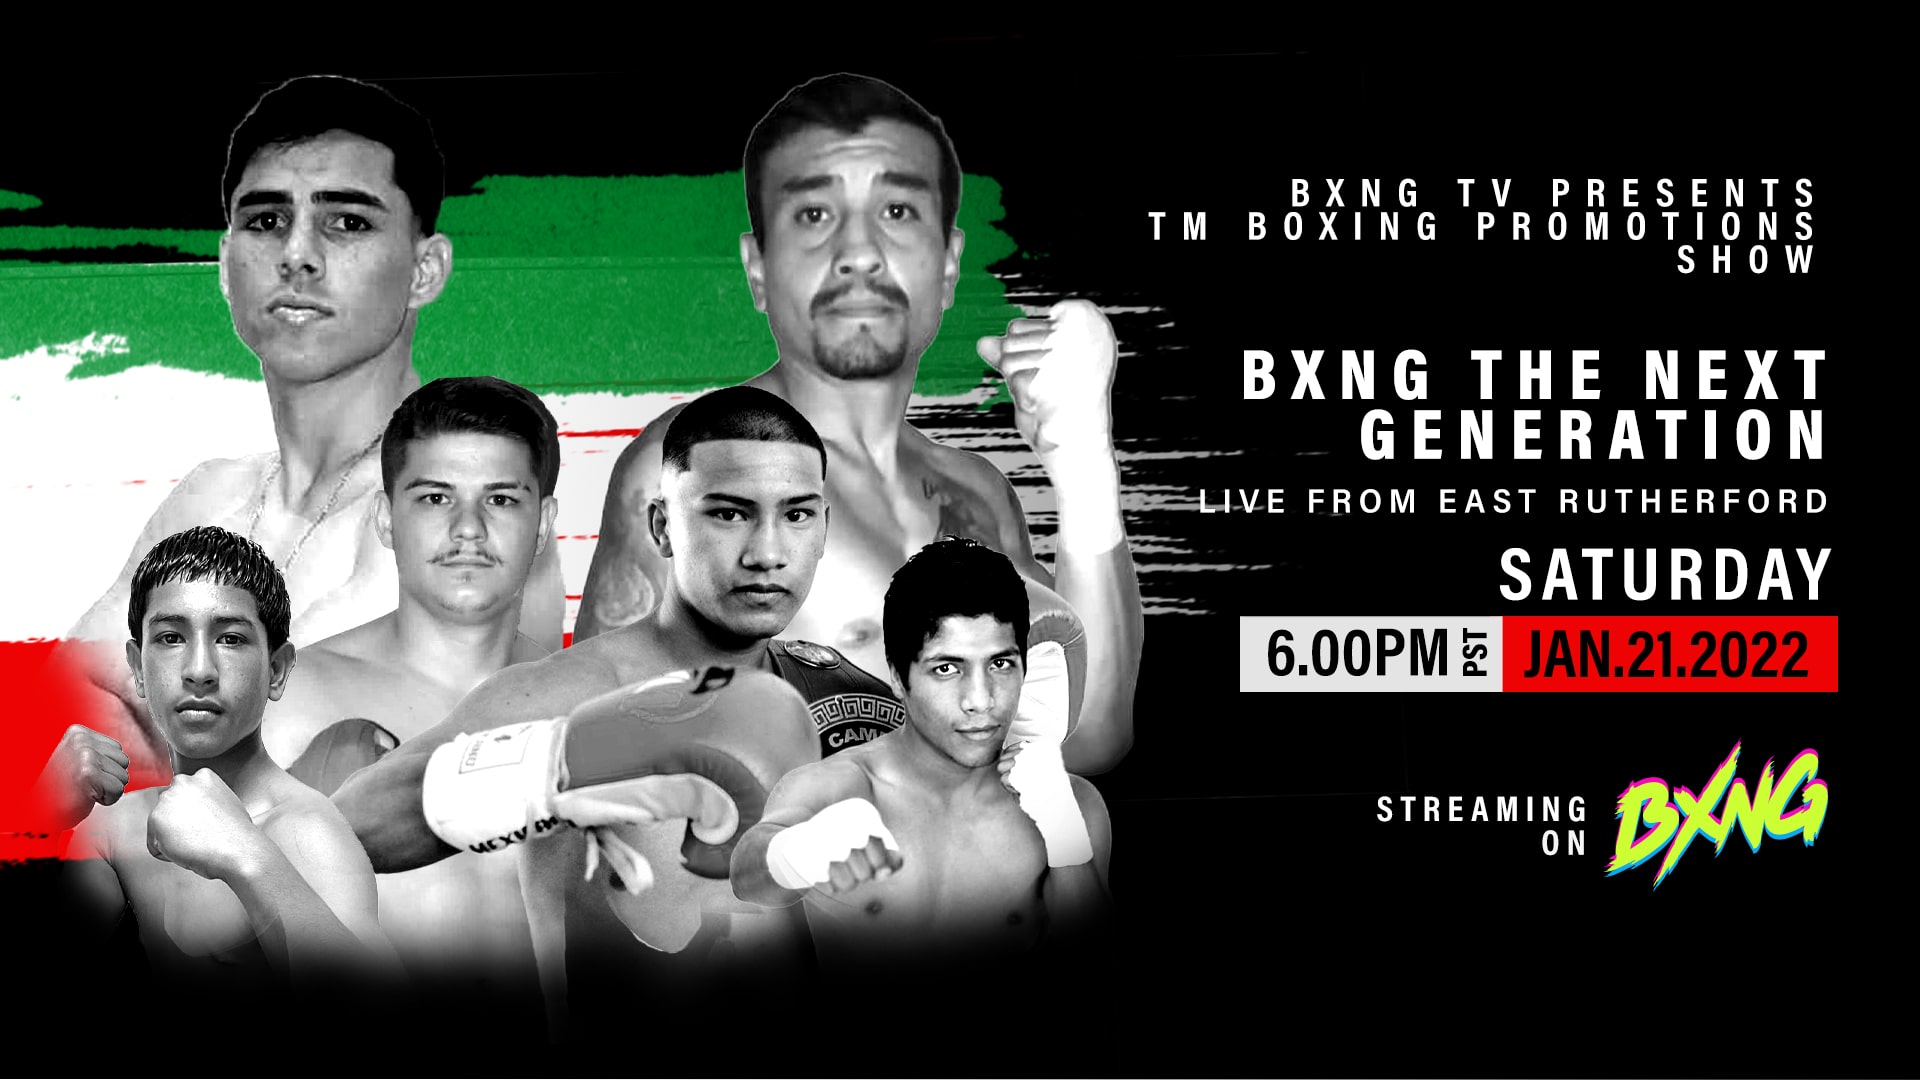 BXNG TV Presents TM Boxing Promotions Show Live Stream 01/21/23